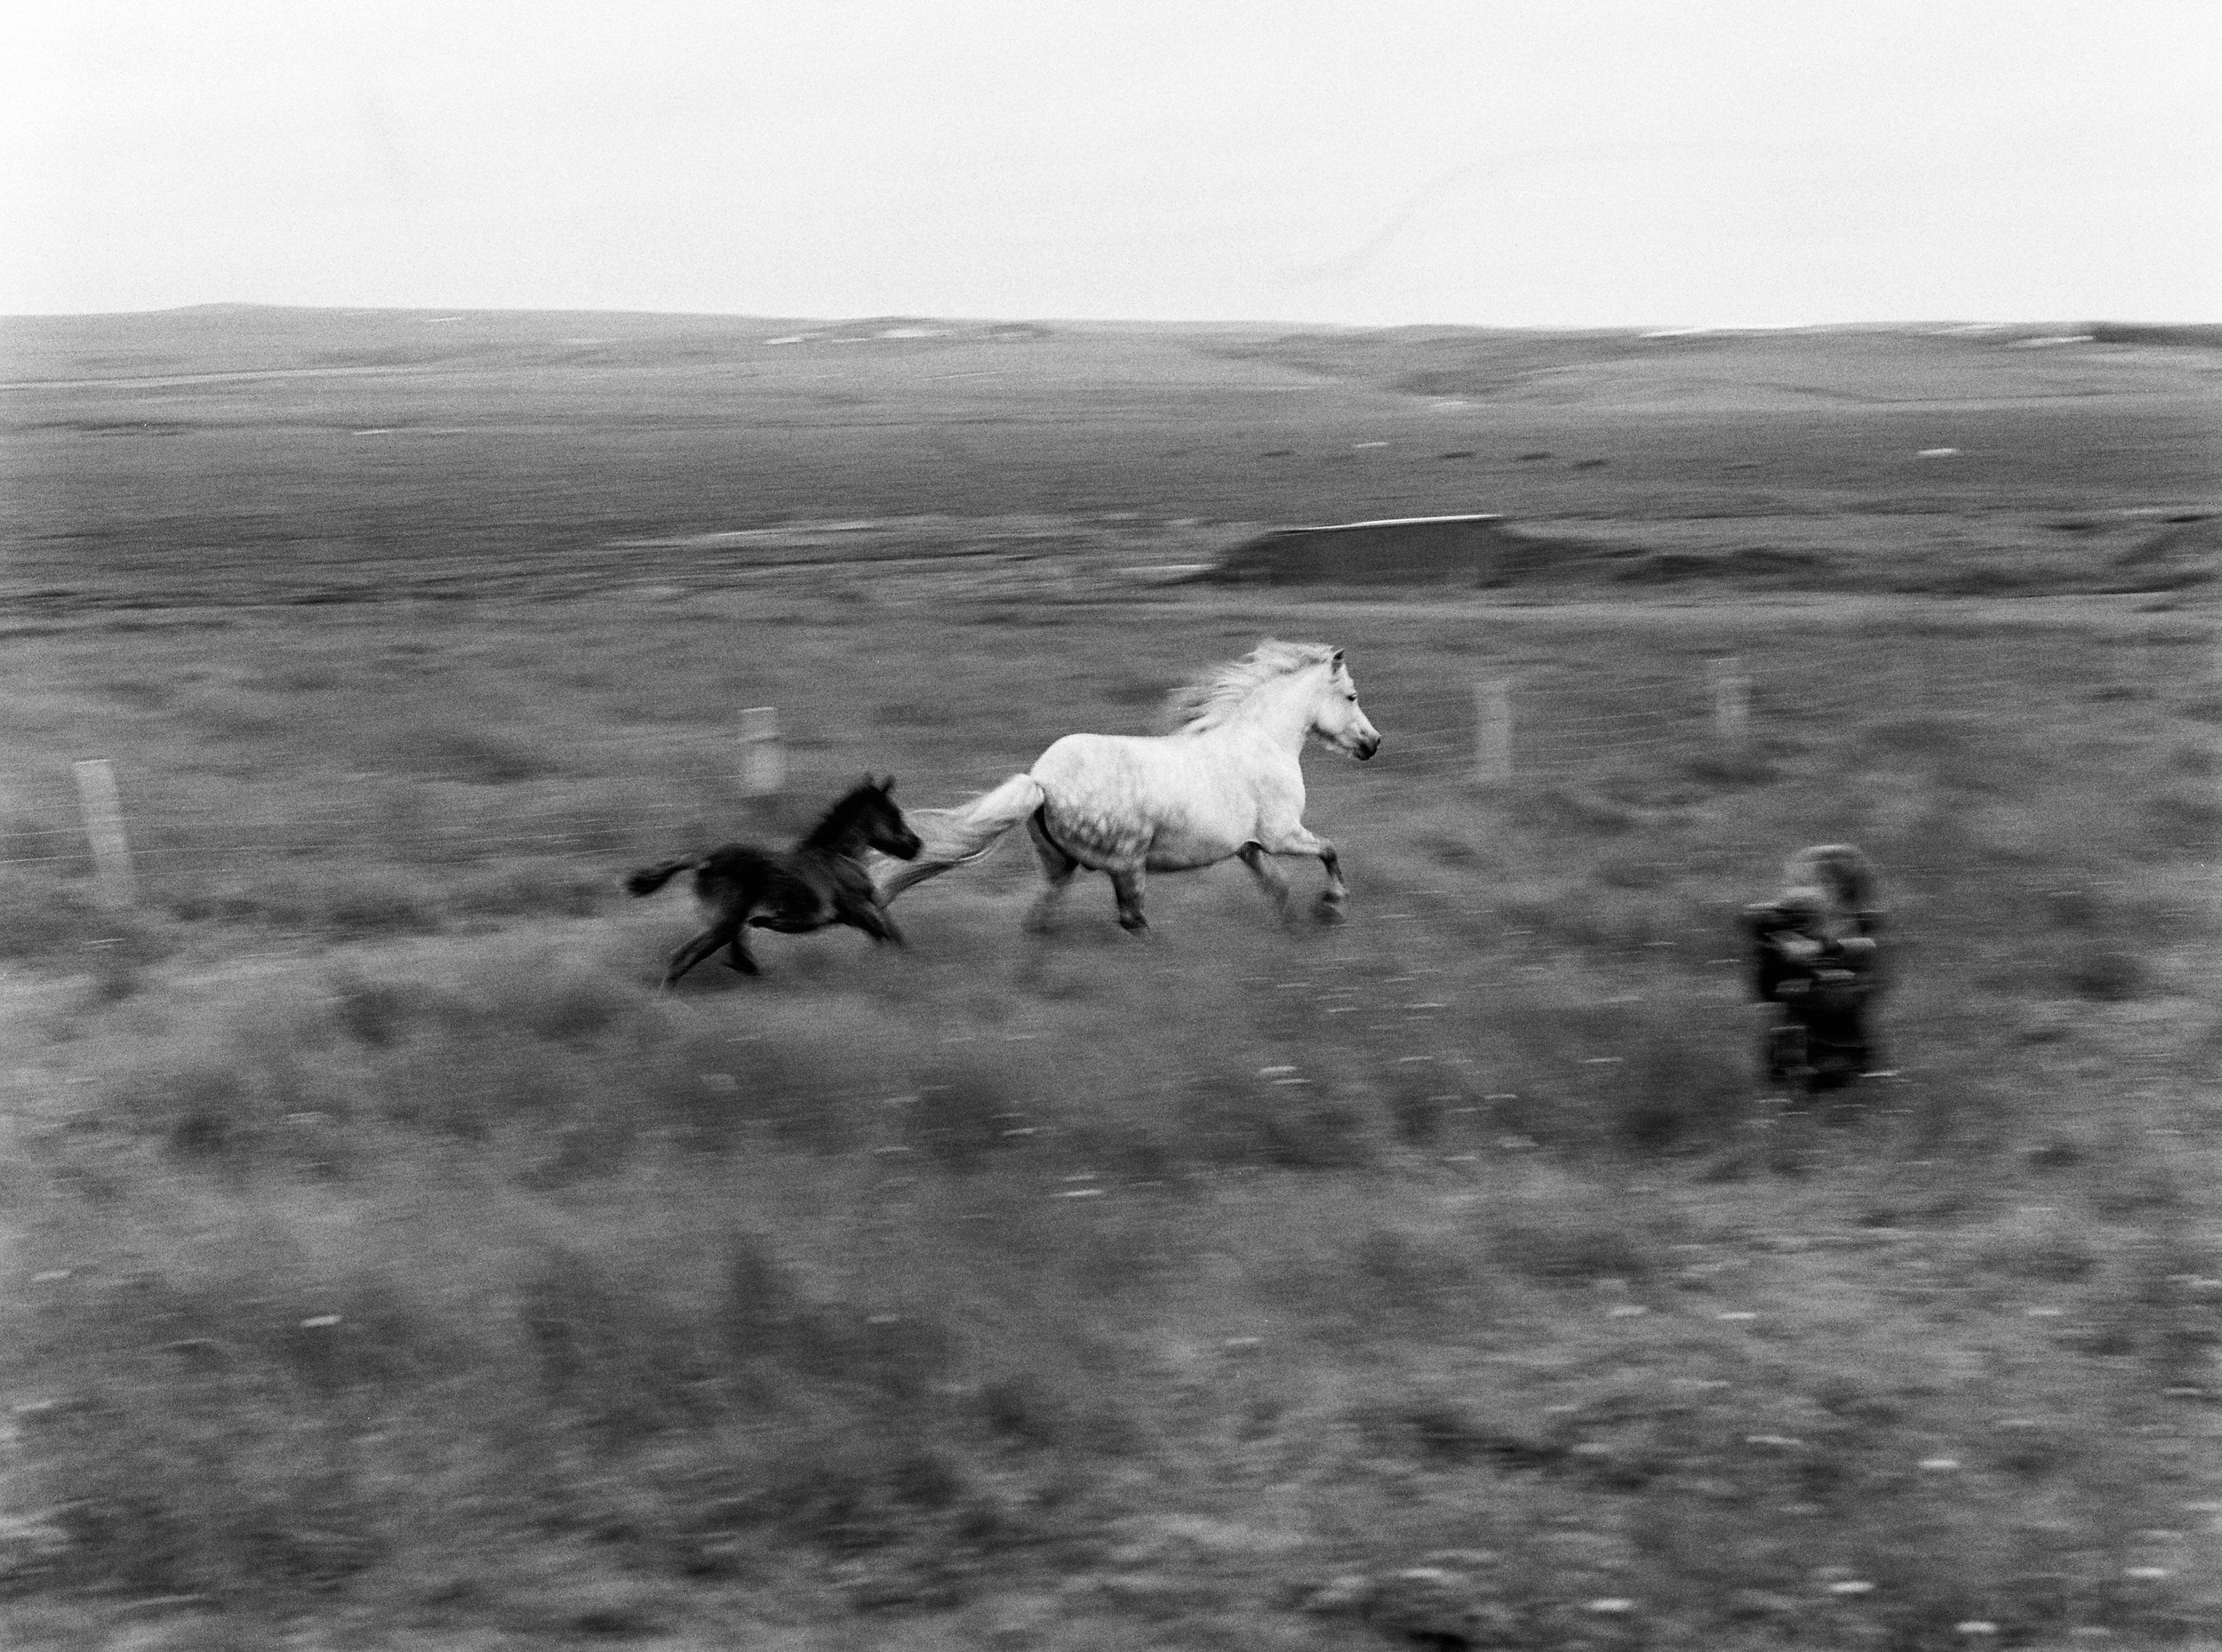 Horses in Iceland by Kristin Sweeting now on Cottage Hill75.jpg